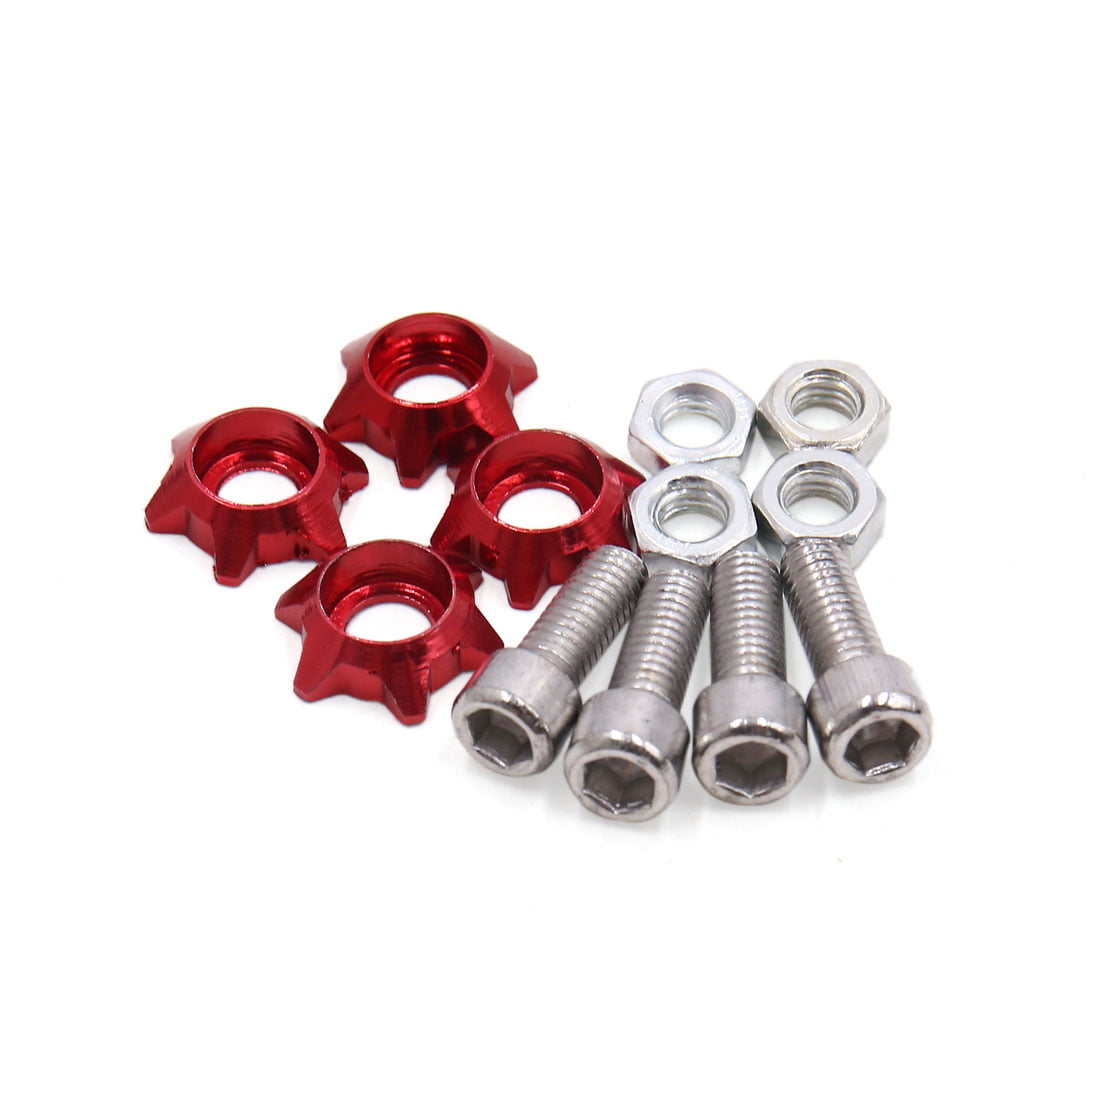 4Pcs Red Metal 6mm Thread Motorcycle Hexagon License Plate Bolts Screws